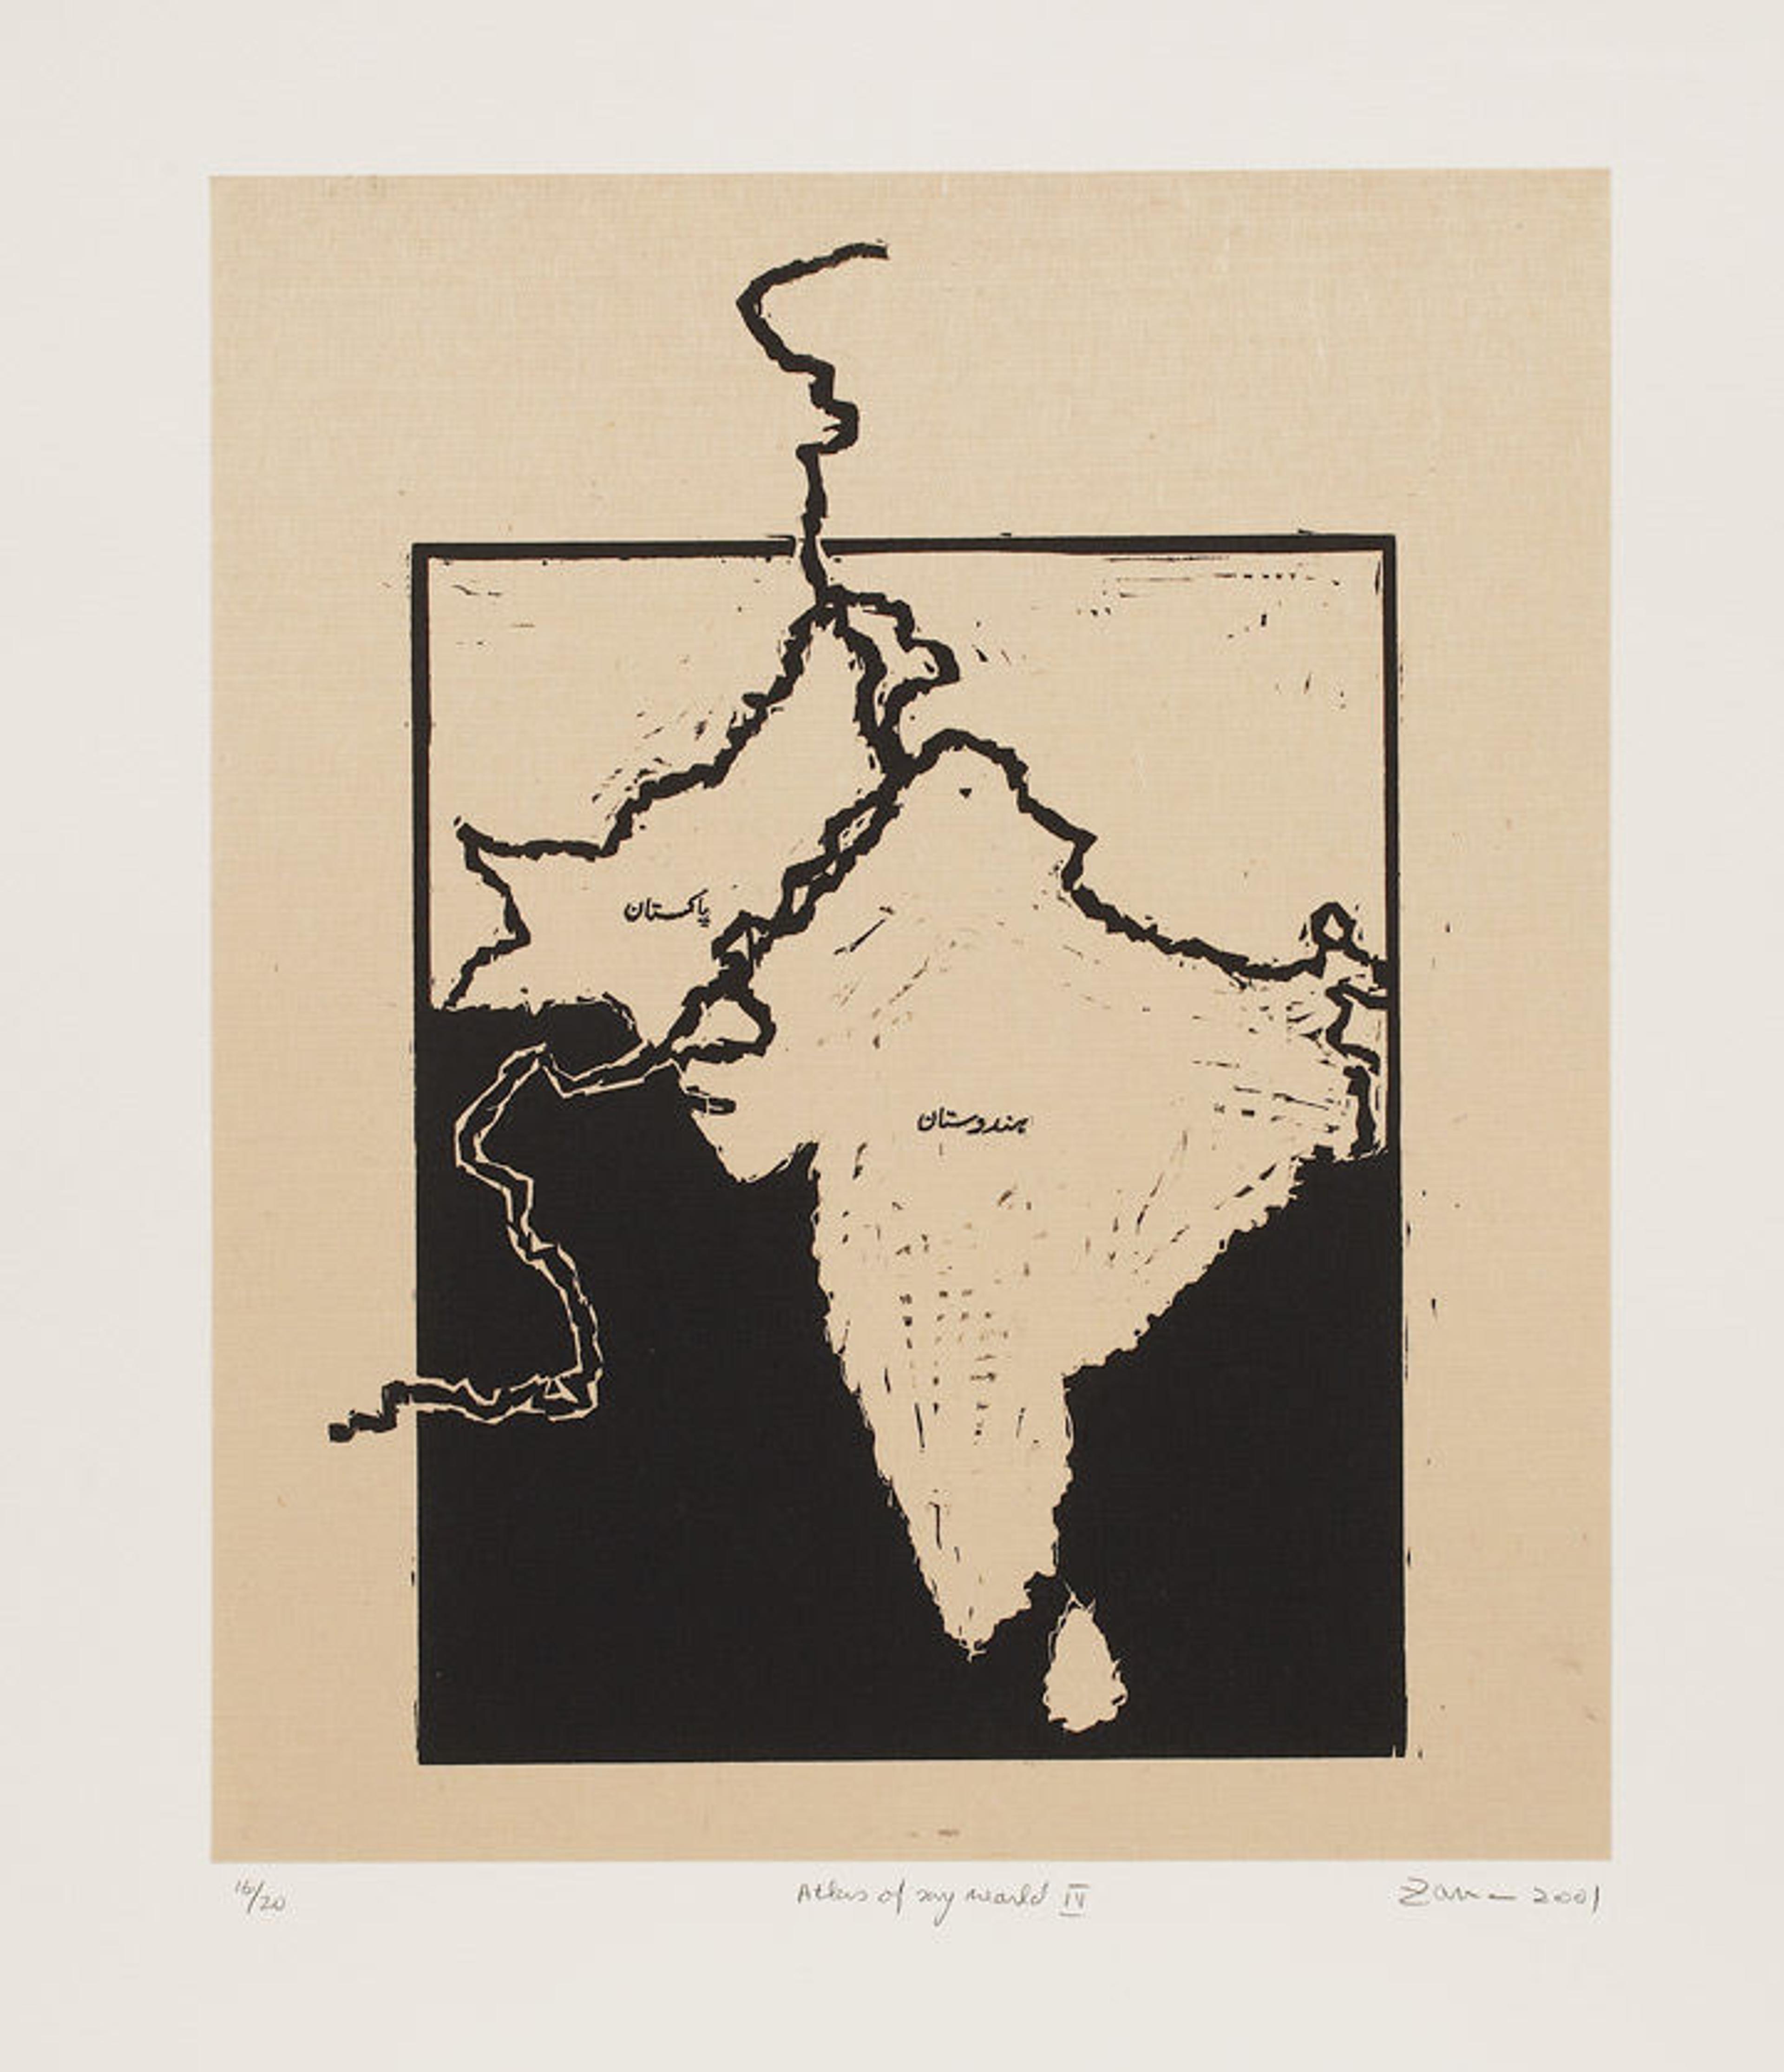 Woodcut print of the outline of India, with Urdu poetry visible in areas of the sheet